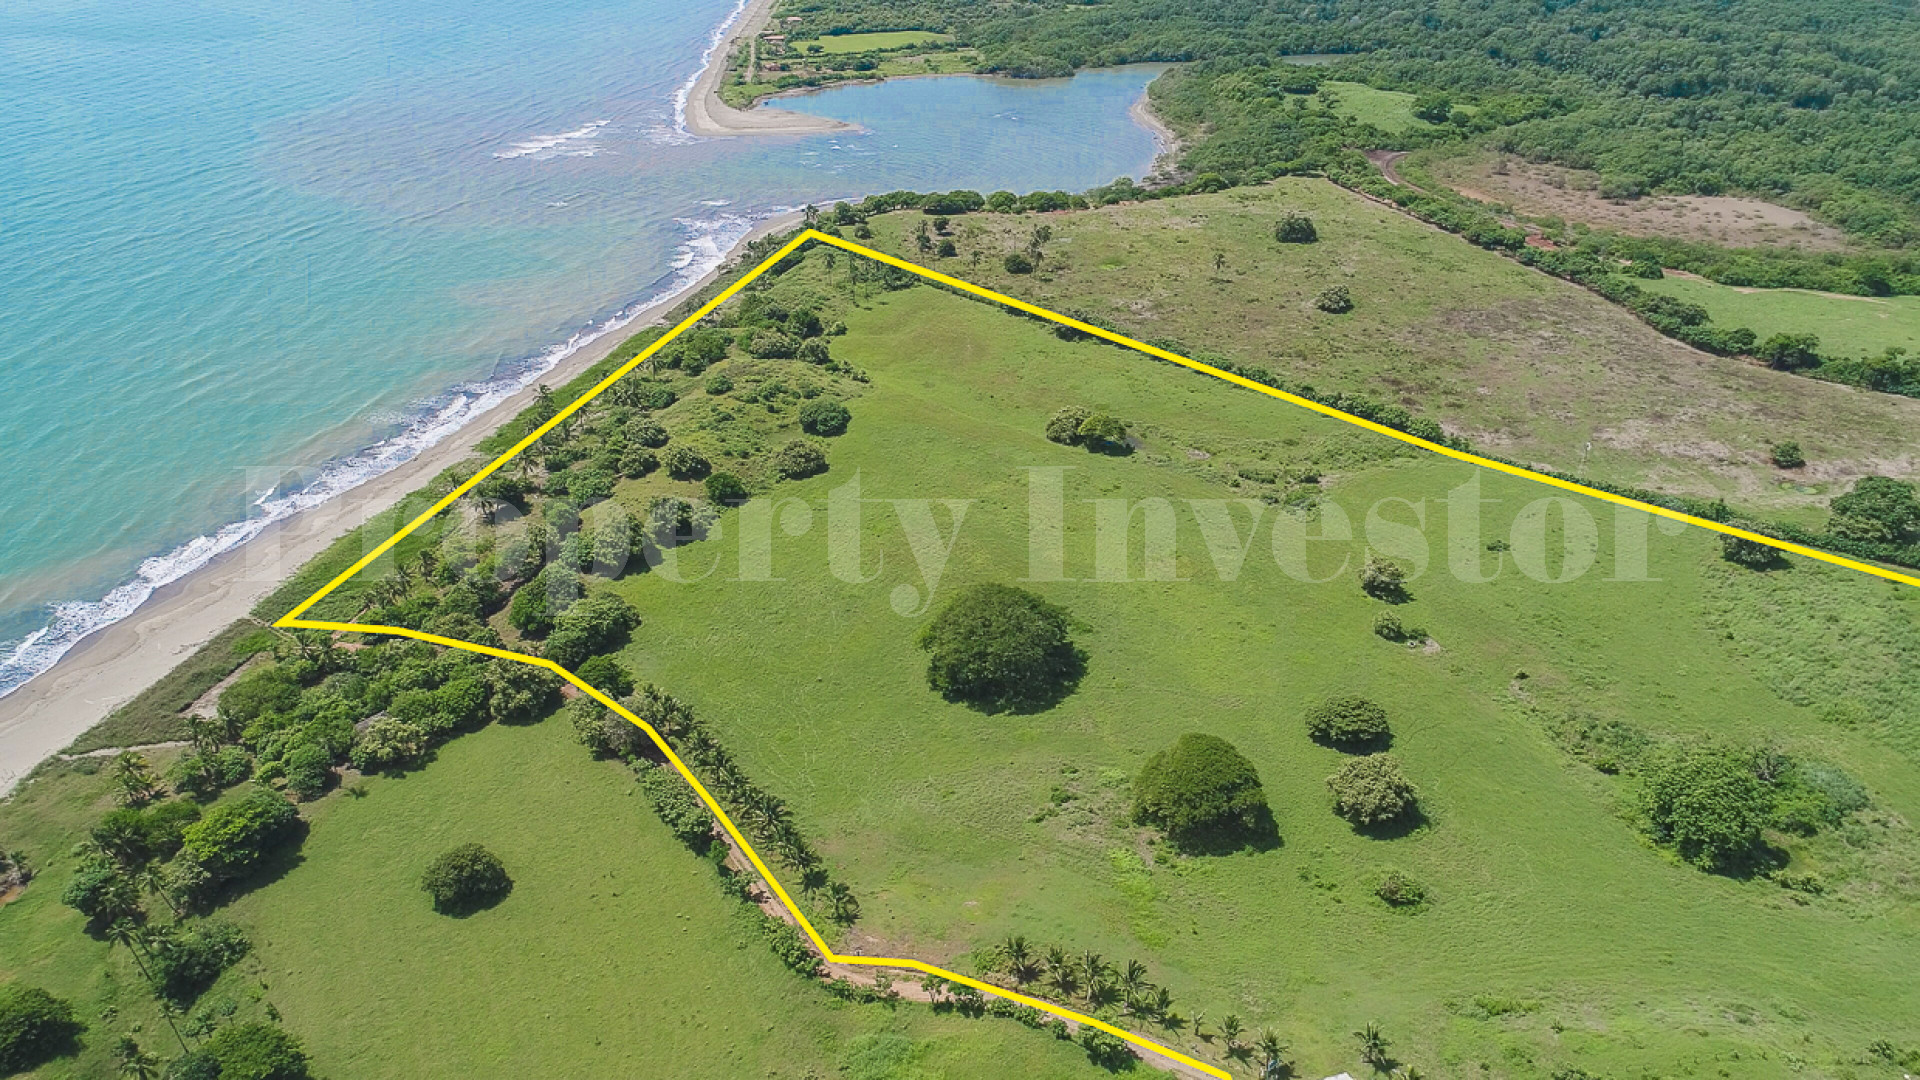 13.6 Hectare Commercial Beachfront Lot for Sale in El Manantial, Panama